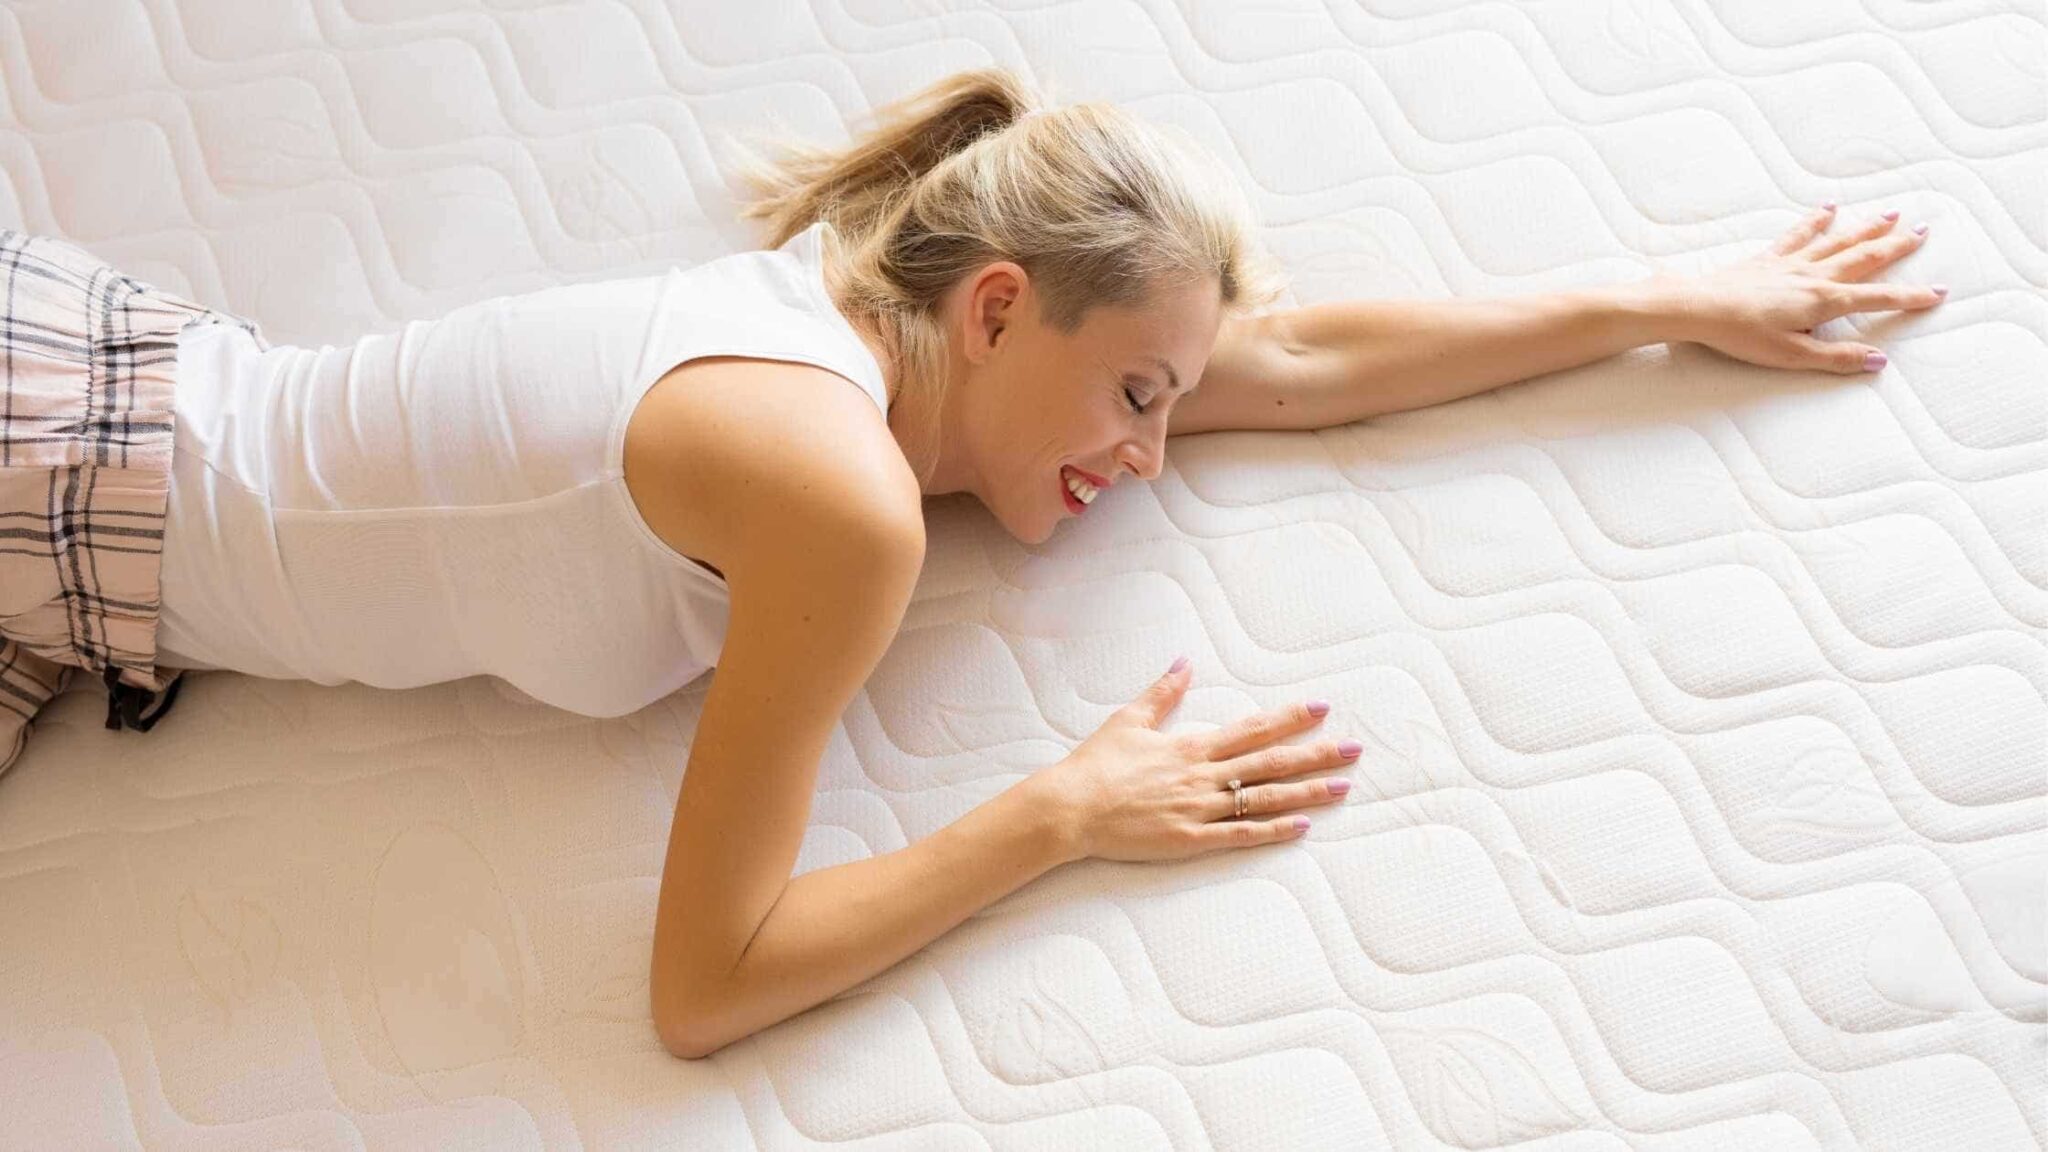 best mattresses for back pain in india